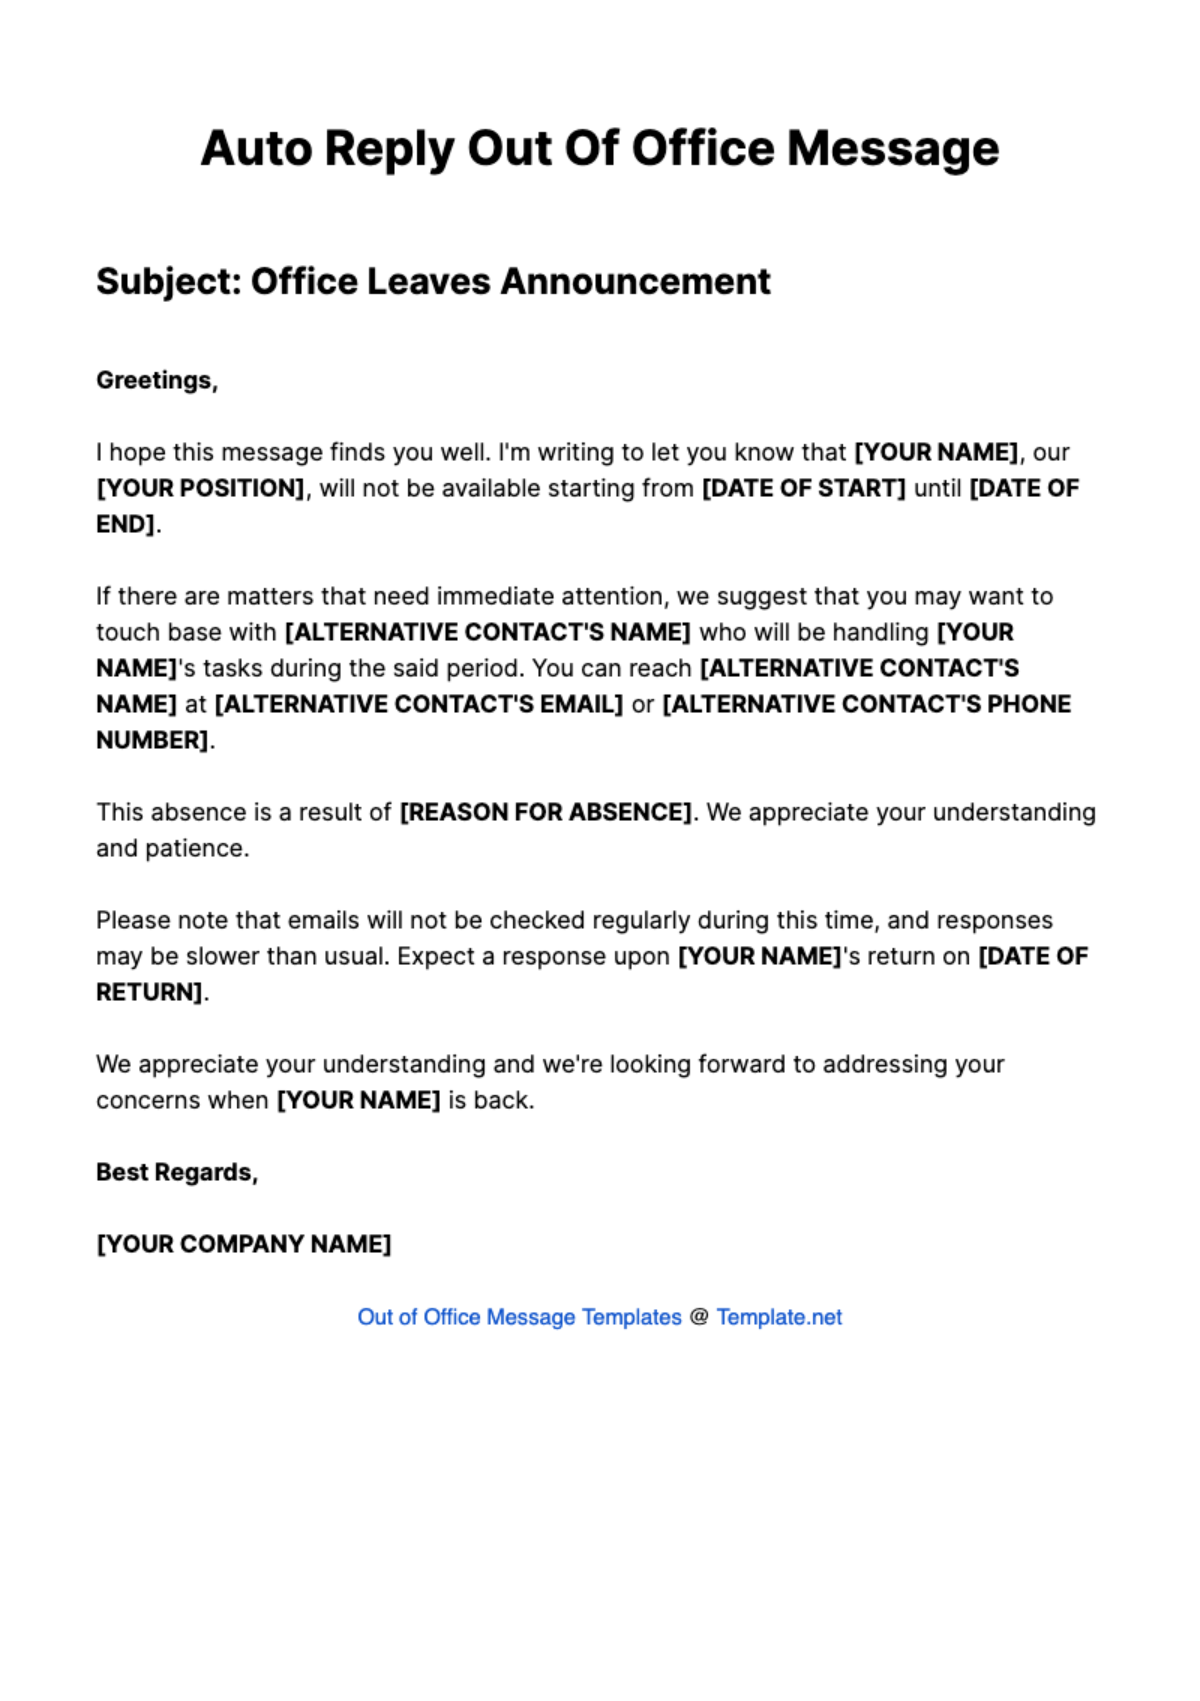 Auto Reply Out Of Office Message Template